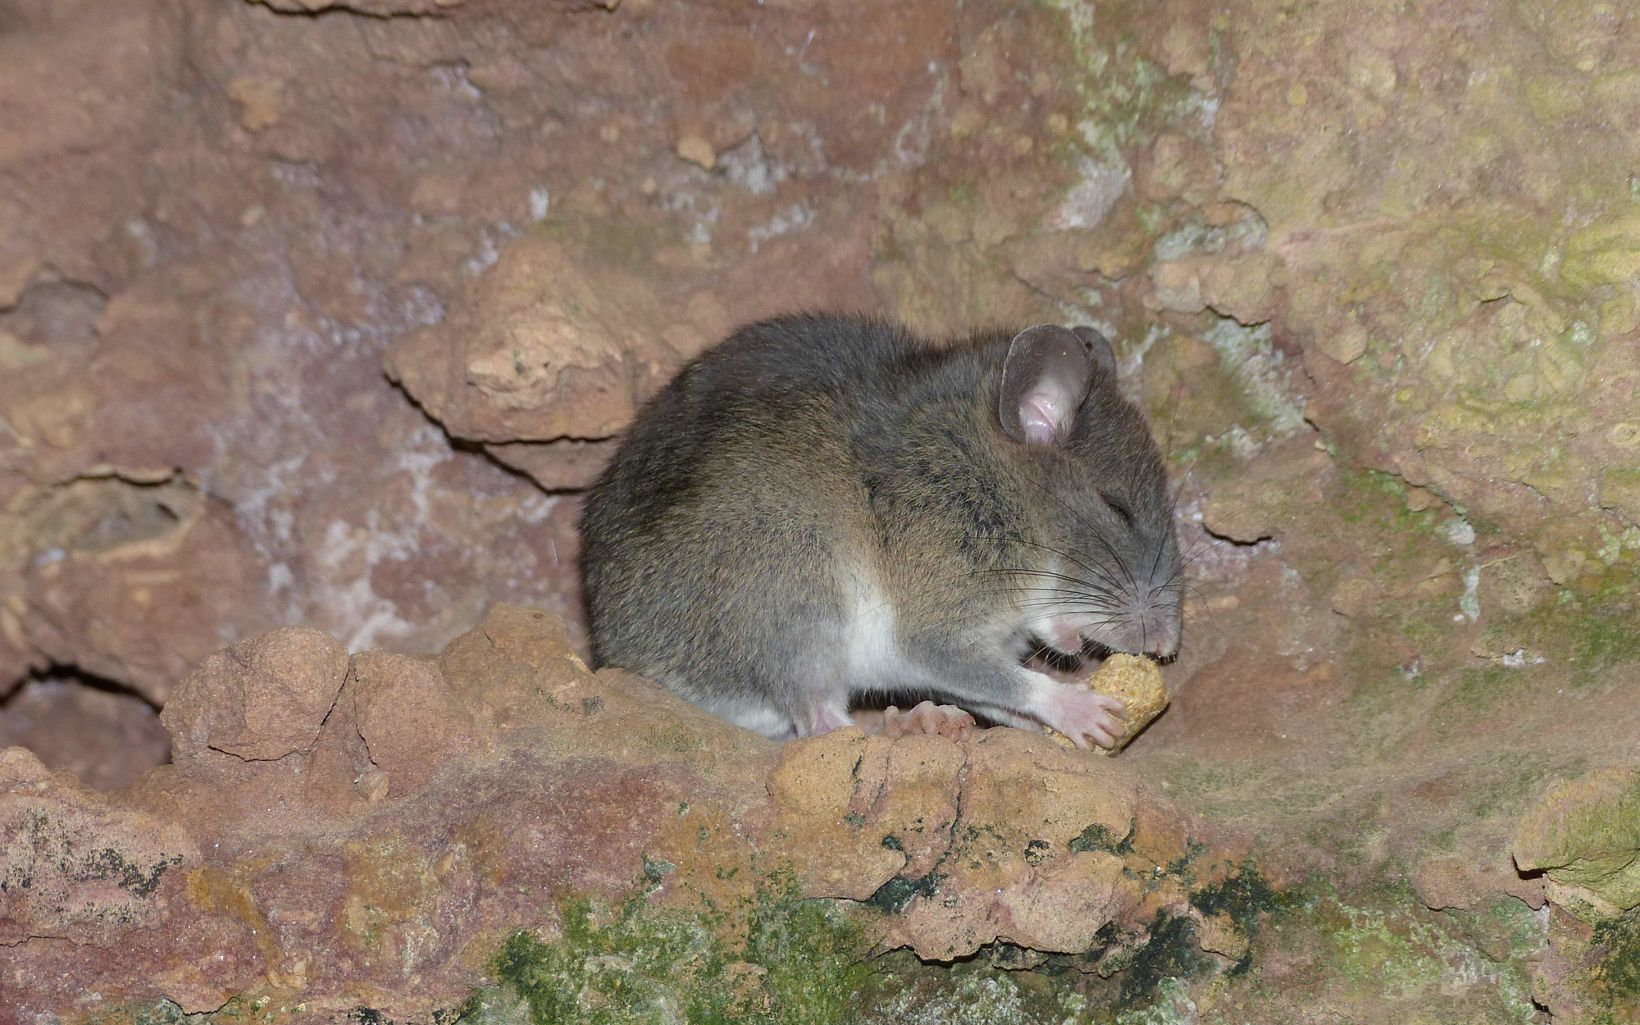 Allegheny Woodrat Endangered in Ohio, the Allegheny woodrat is found at the Edge of Appalachia preserve. TNC is collaborating to bring new woodrats to Ohio to diversify its genetic pool here. © Rich McCarty/TNC